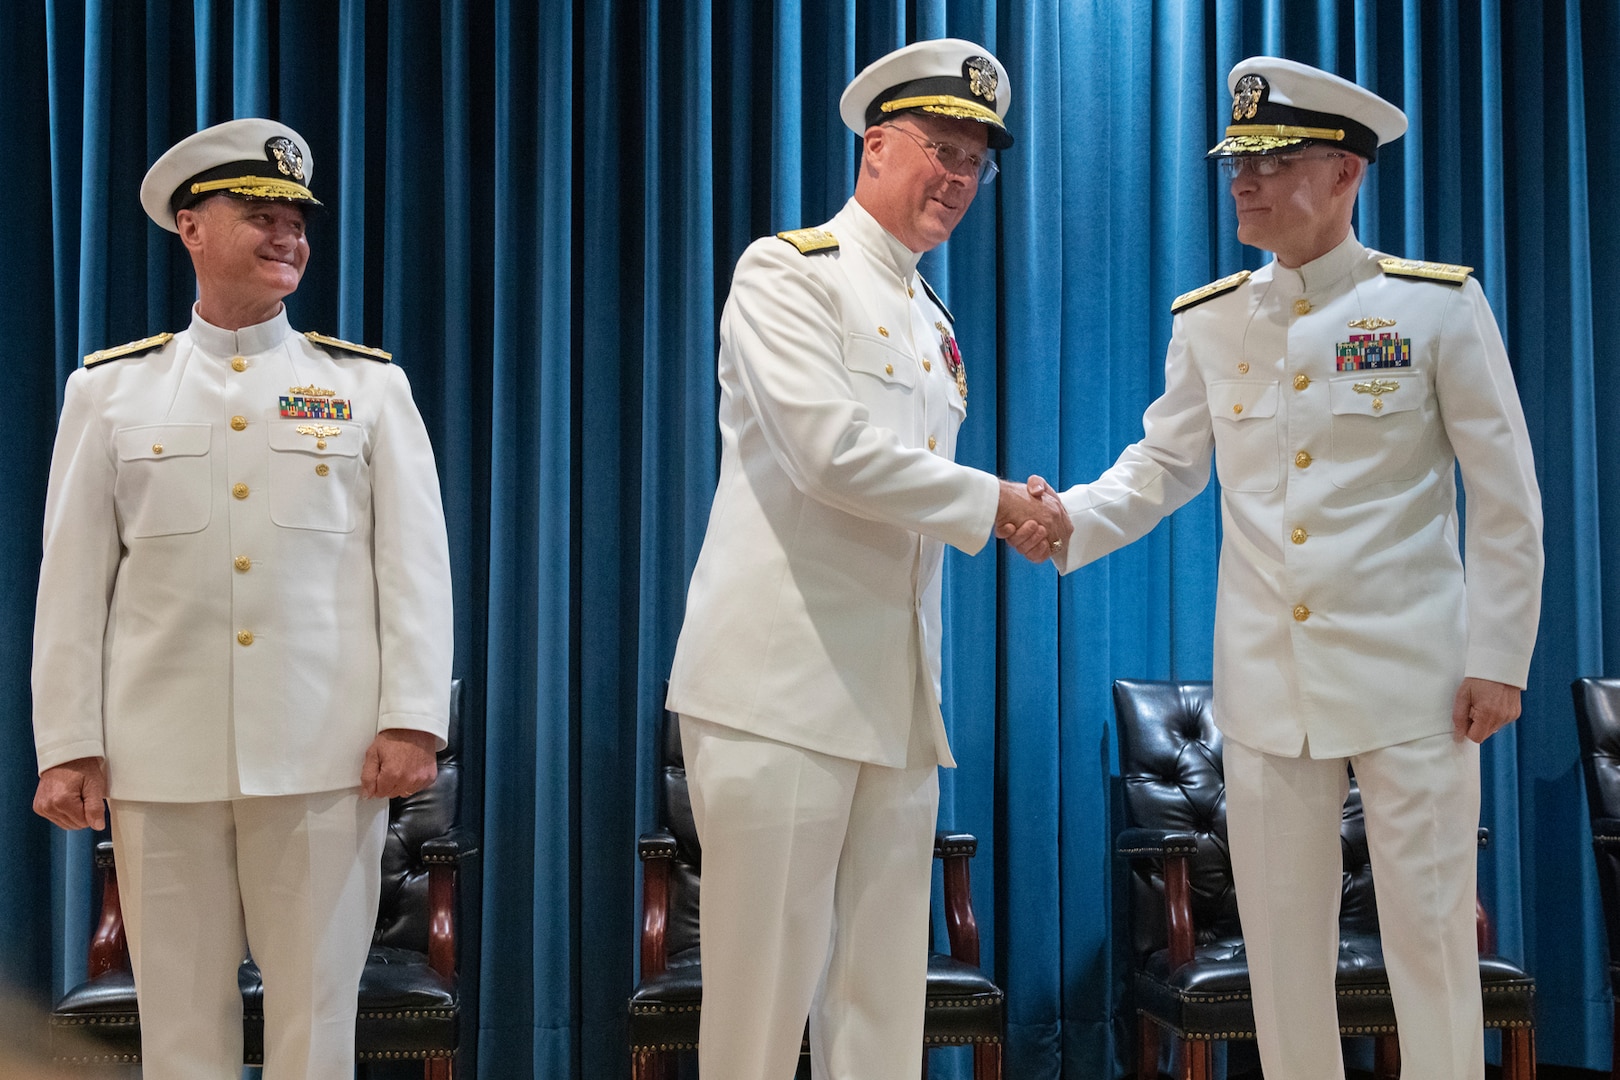 (R) Rear Adm. William Greene relieved (C) Rear Adm. Eric Ver Hage, as Commander, Navy Regional Maintenance Center (CNRMC) and Director, Surface Maintenance, Modernization and Sustainment (SEA 21) during a ceremony held at the Washington Navy Yard. Vice Admiral Bill Galinis, Commander, Naval Sea Systems Command (NAVSEA) hosted the ceremony.